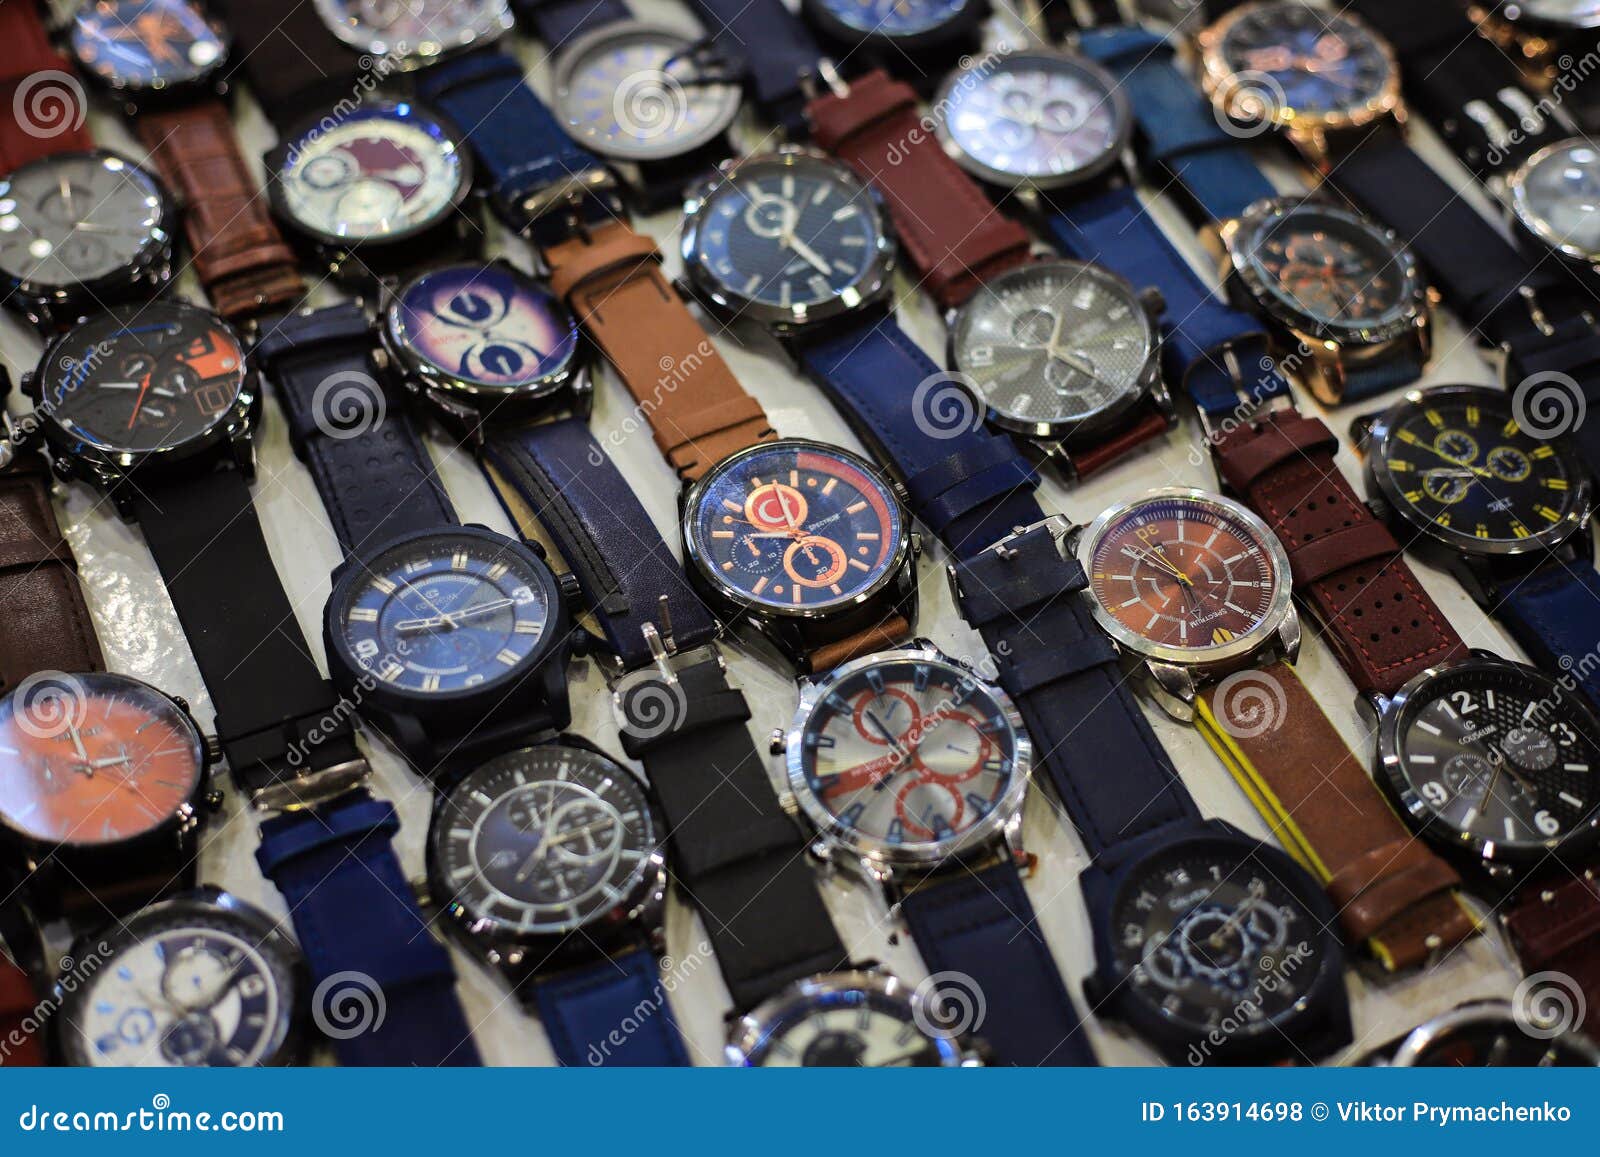 Men`s Wrist Watches on the Market Counter Editorial Stock Photo - Image ...